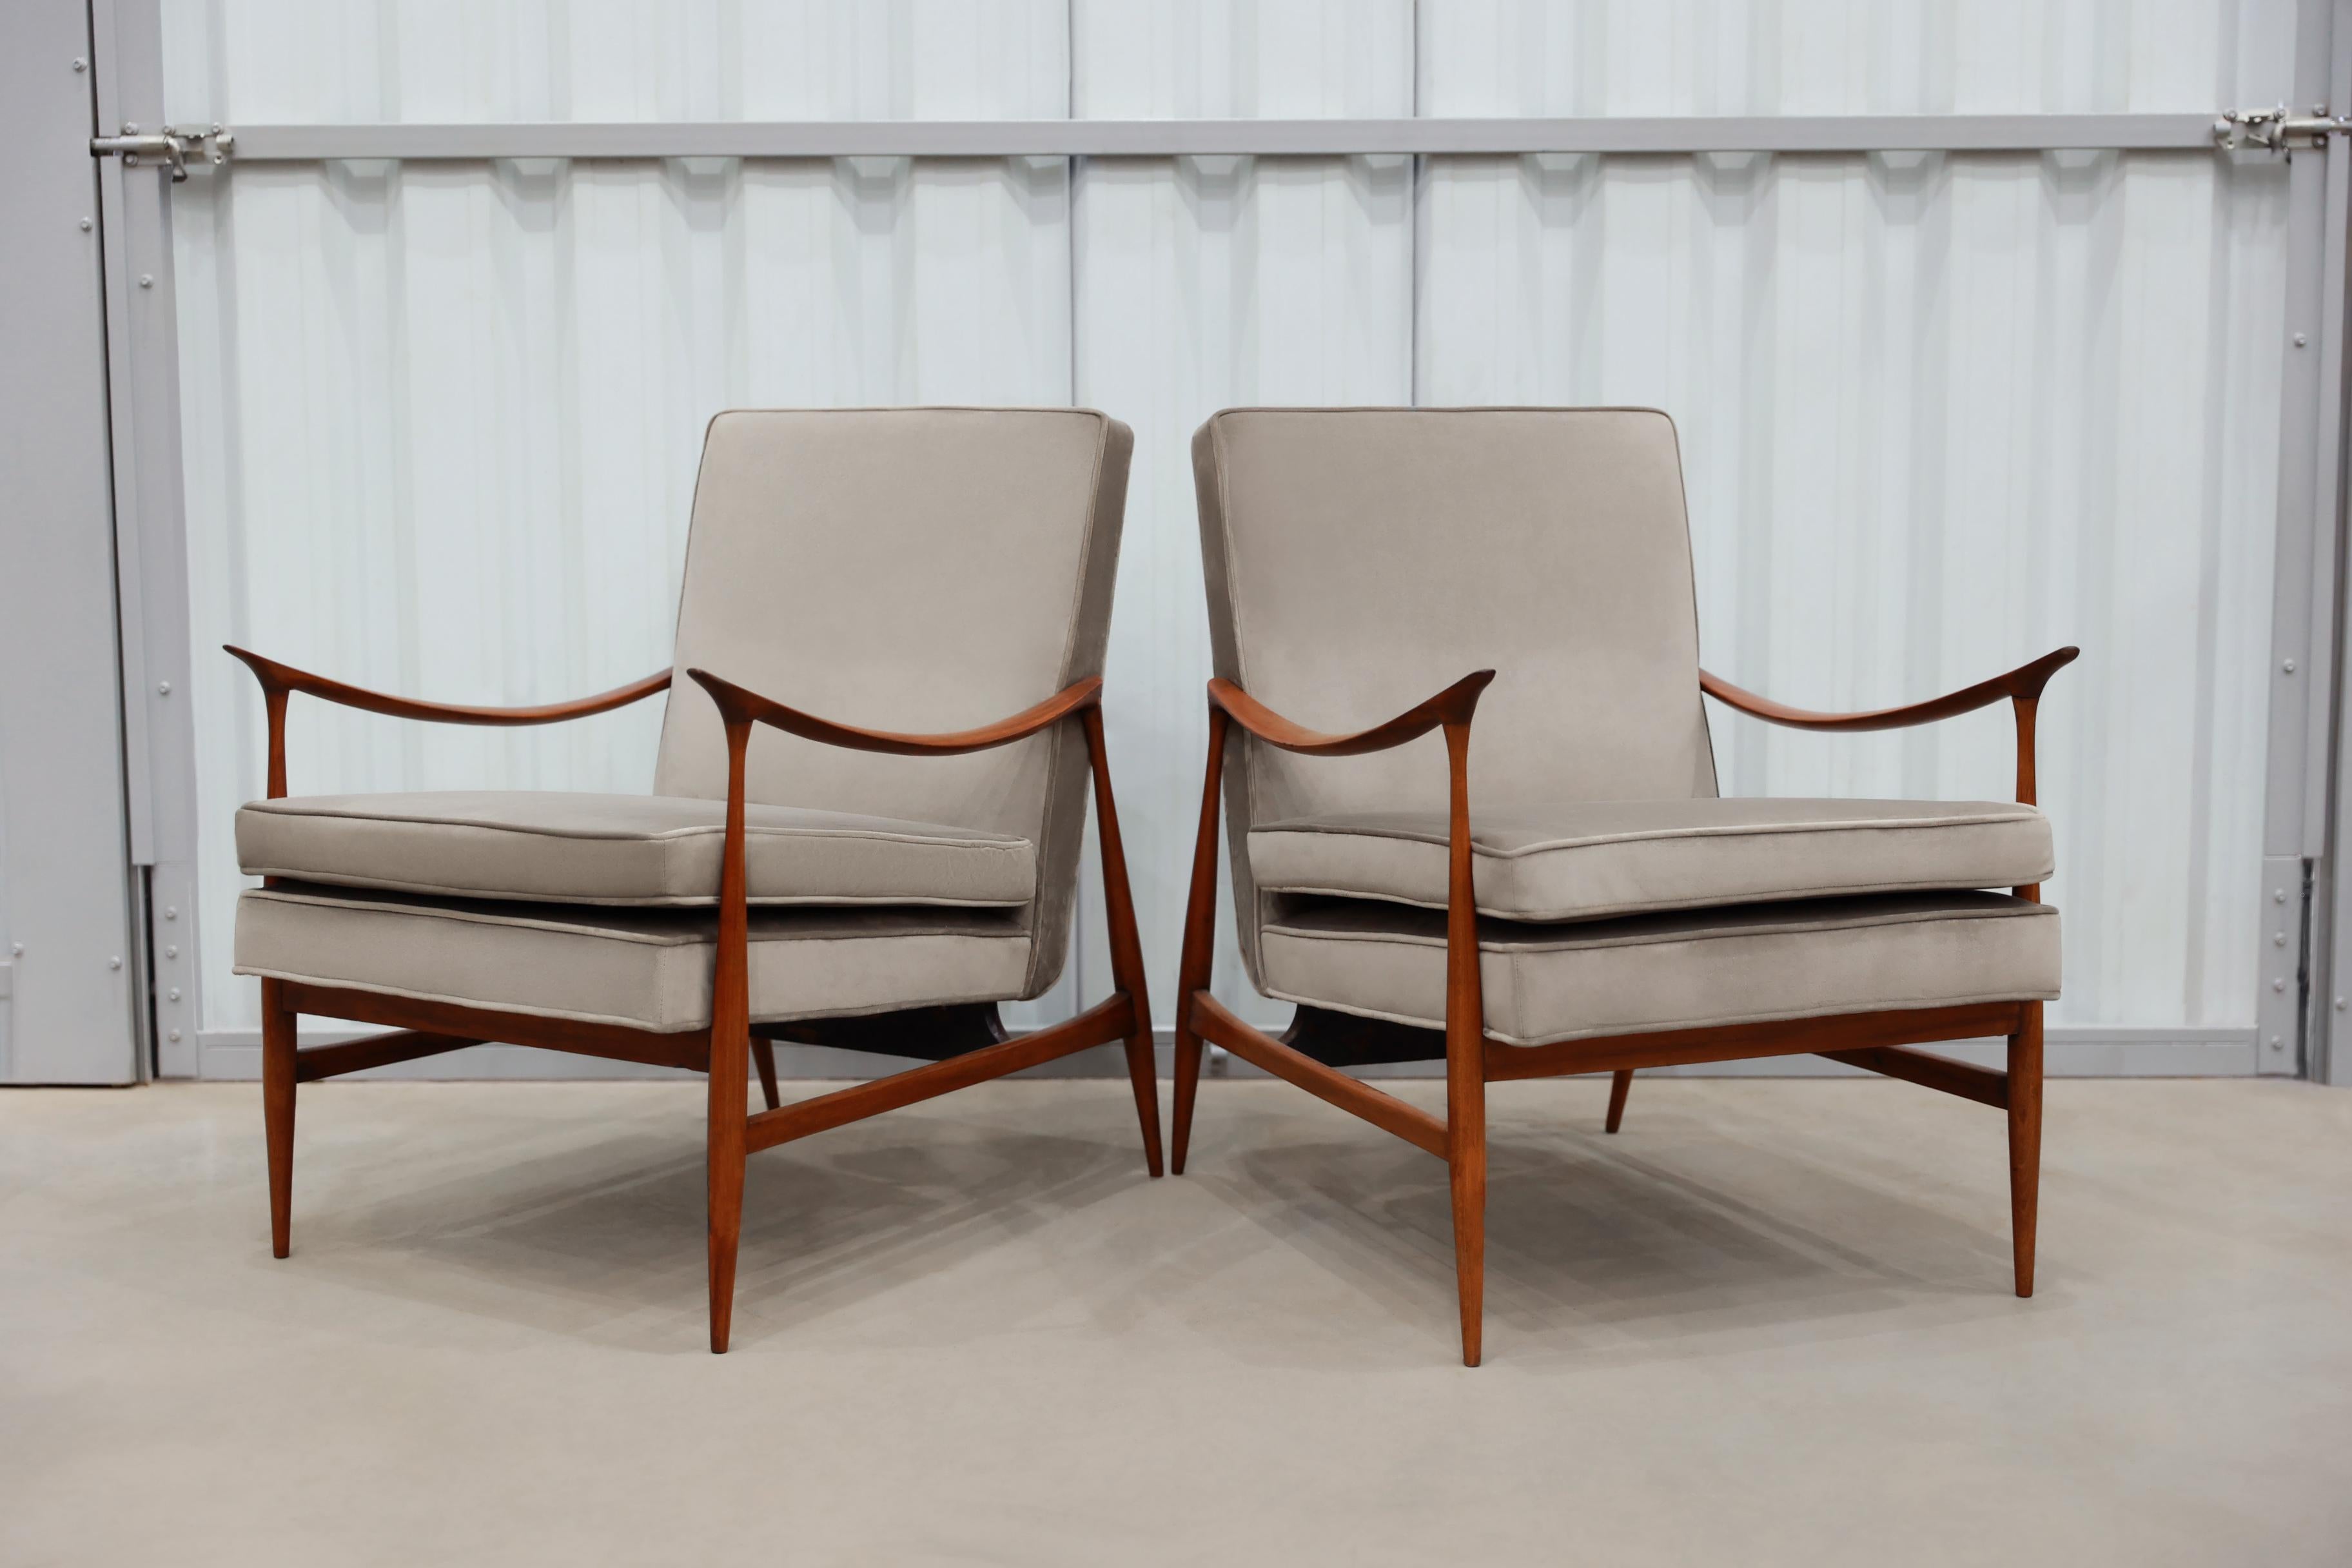 Available today in NYC with free domestic shipping included, these Pair of Armchairs in Hardwood and Brown Fabric, by Jorge Zalszupin made in the fifties in Brazil are nothing less than spectacular!

These delicate armchairs are made in Brazilian